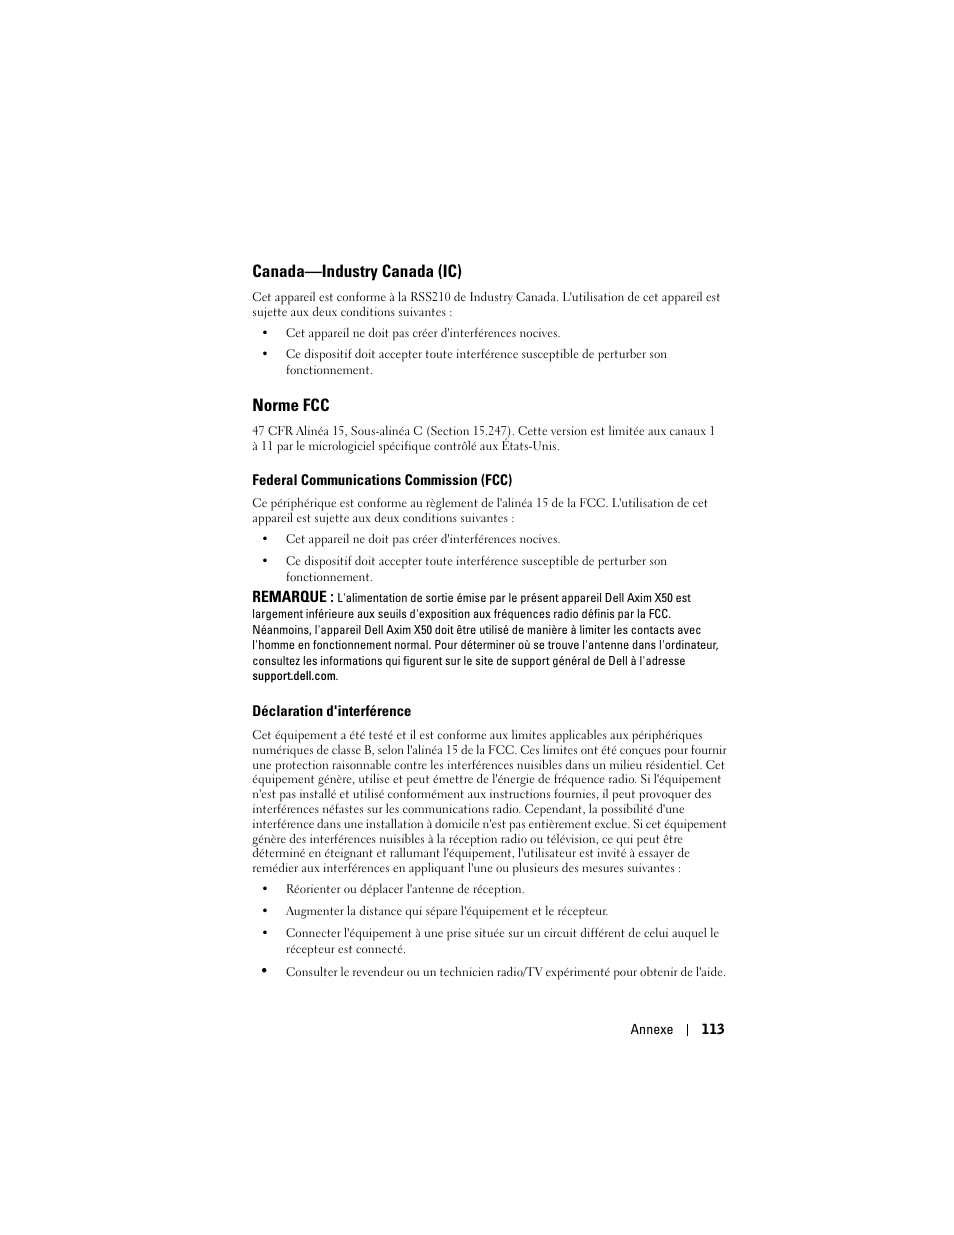 Canada-industry canada (ic), Norme fcc, Canada—industry canada (ic) | Dell Axim X50 Manuel d'utilisation | Page 113 / 154